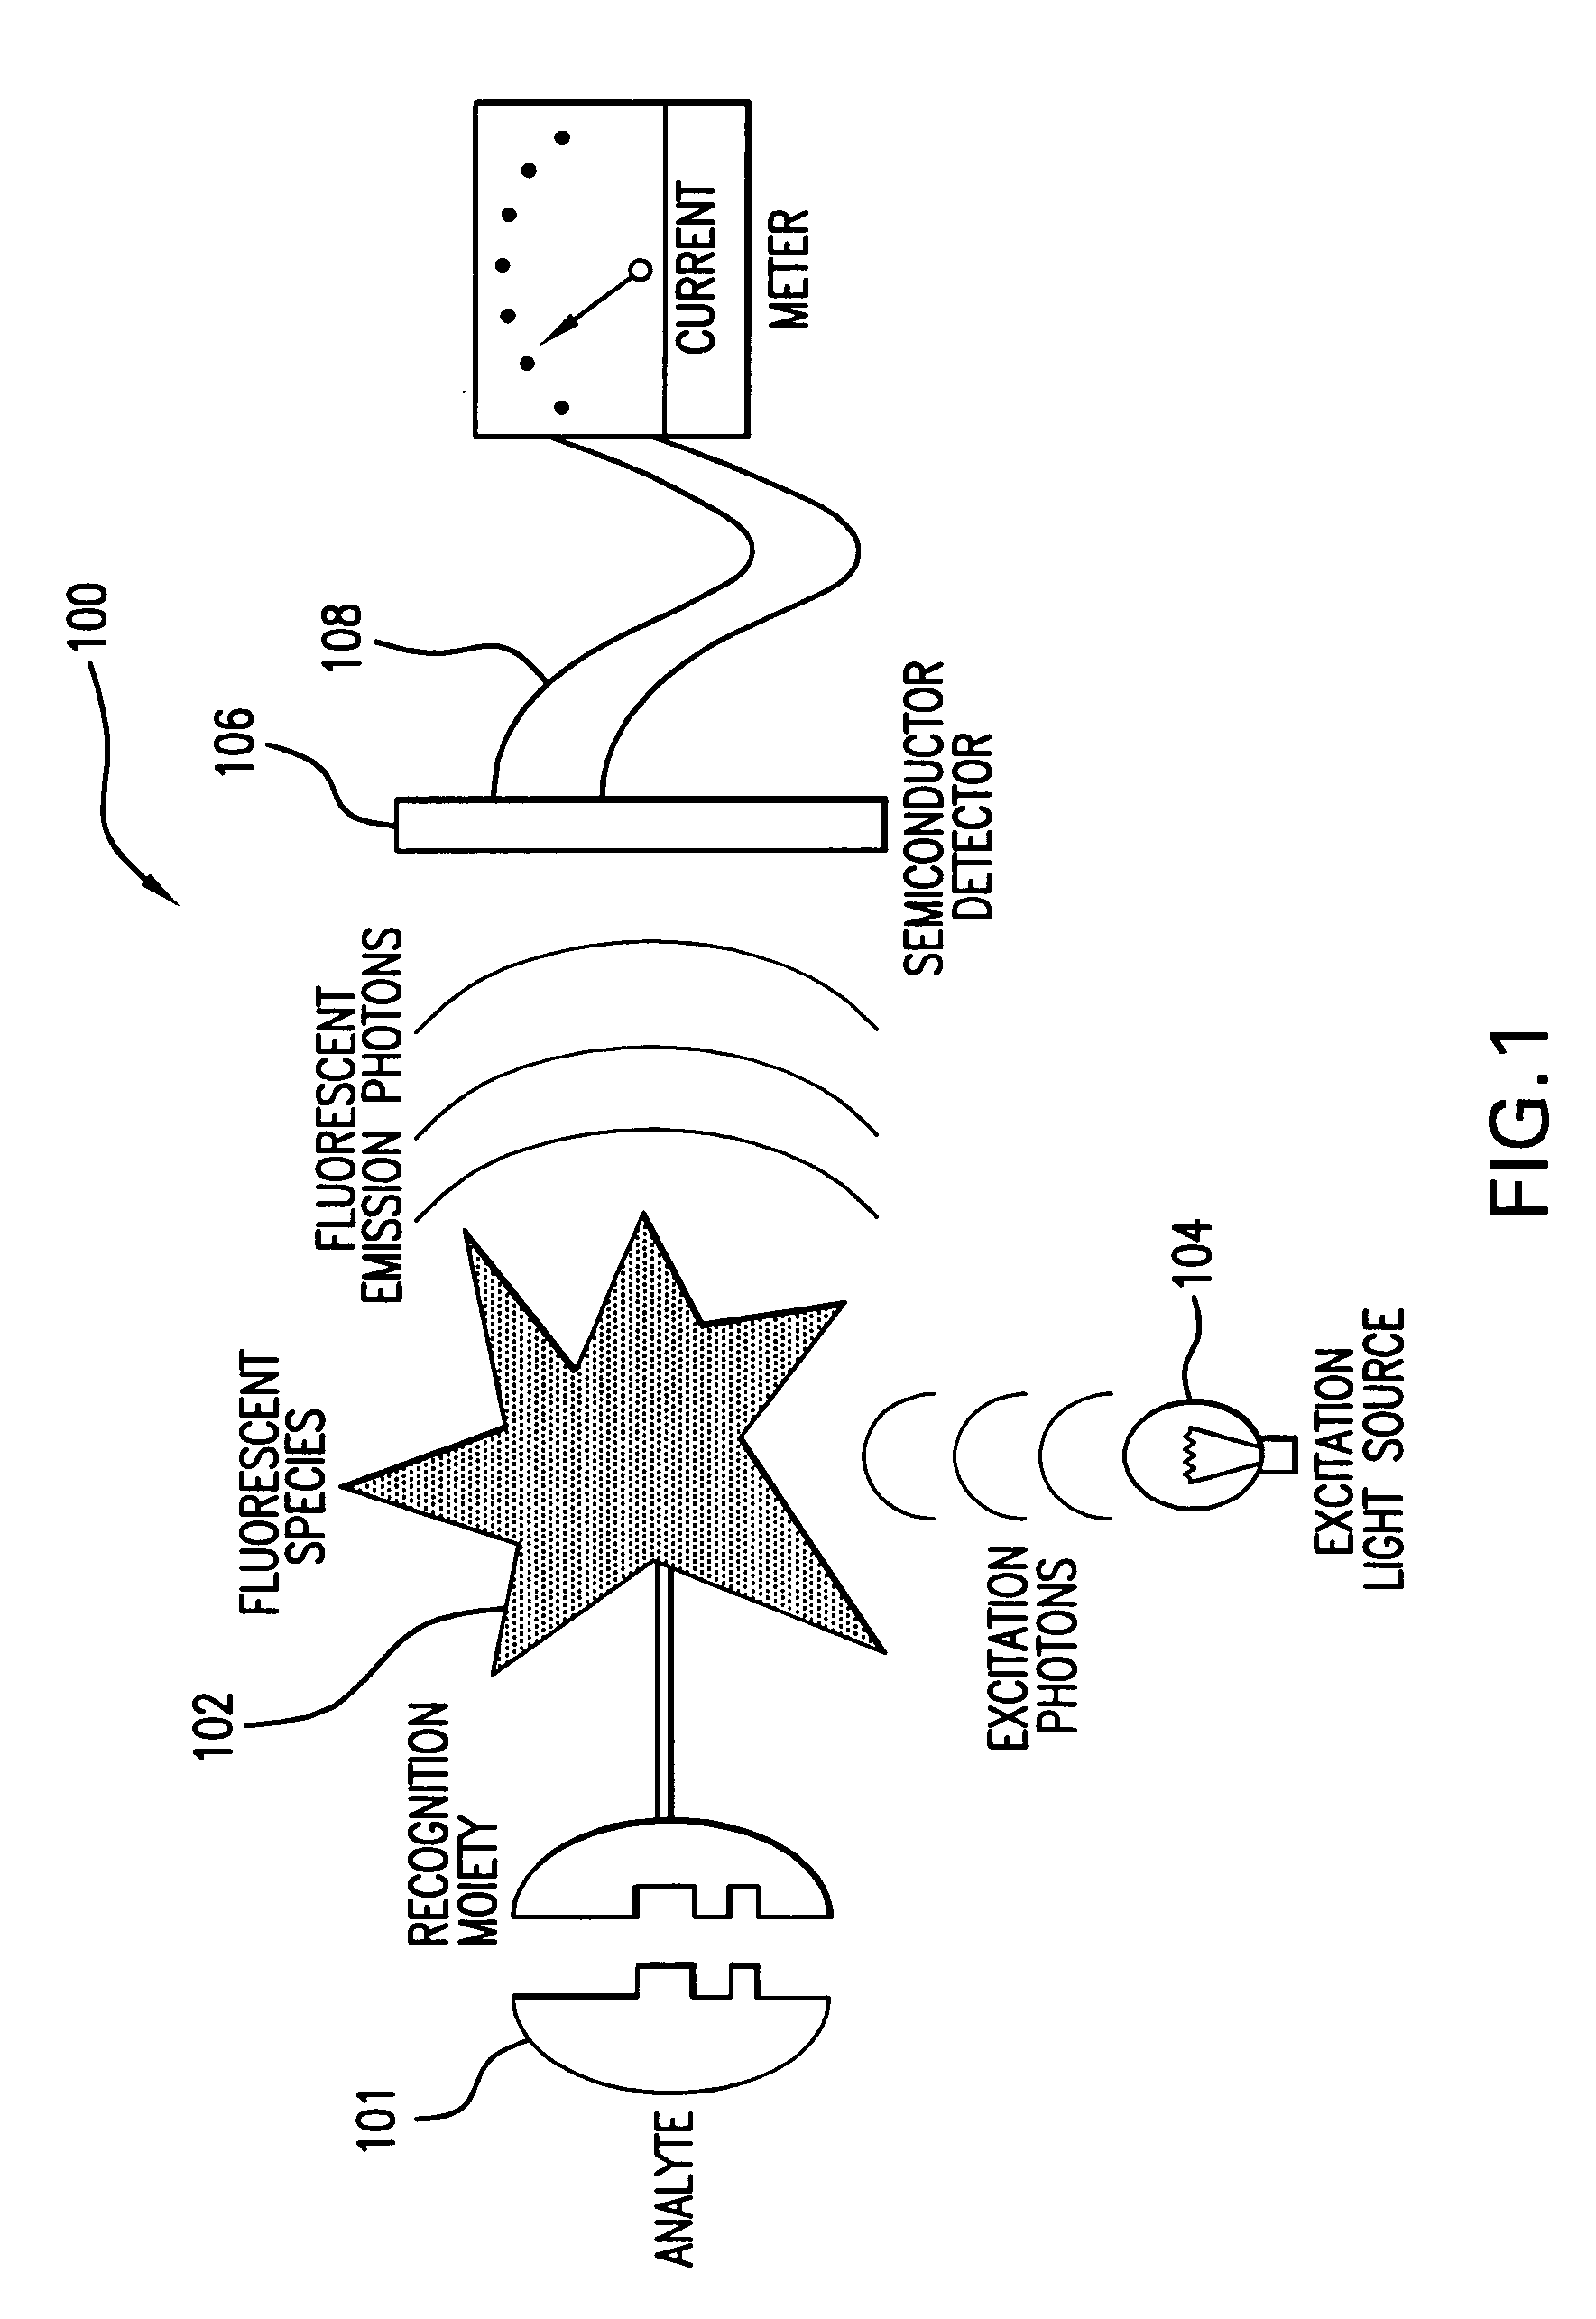 Systems and methods for extending the useful life of optical sensors